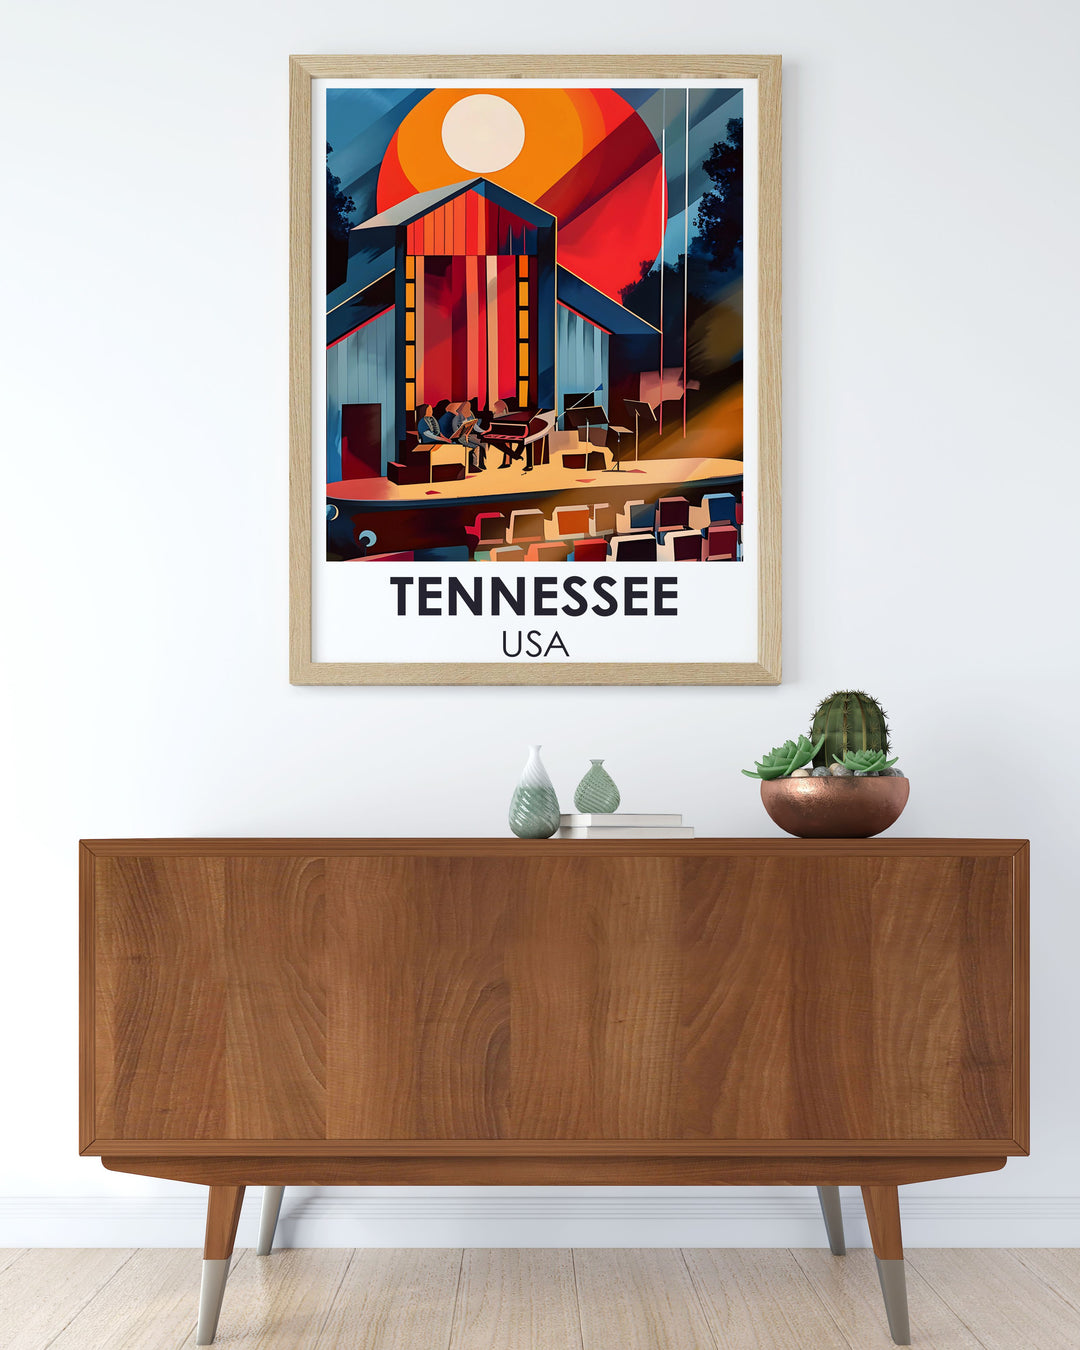 Grand Ole Opry Print highlighting the iconic Ryman Auditorium in Nashville Tennessee. This Country Music Art is a beautiful addition to any music lovers collection and makes a thoughtful gift for fans of The Grand Ole Opry.